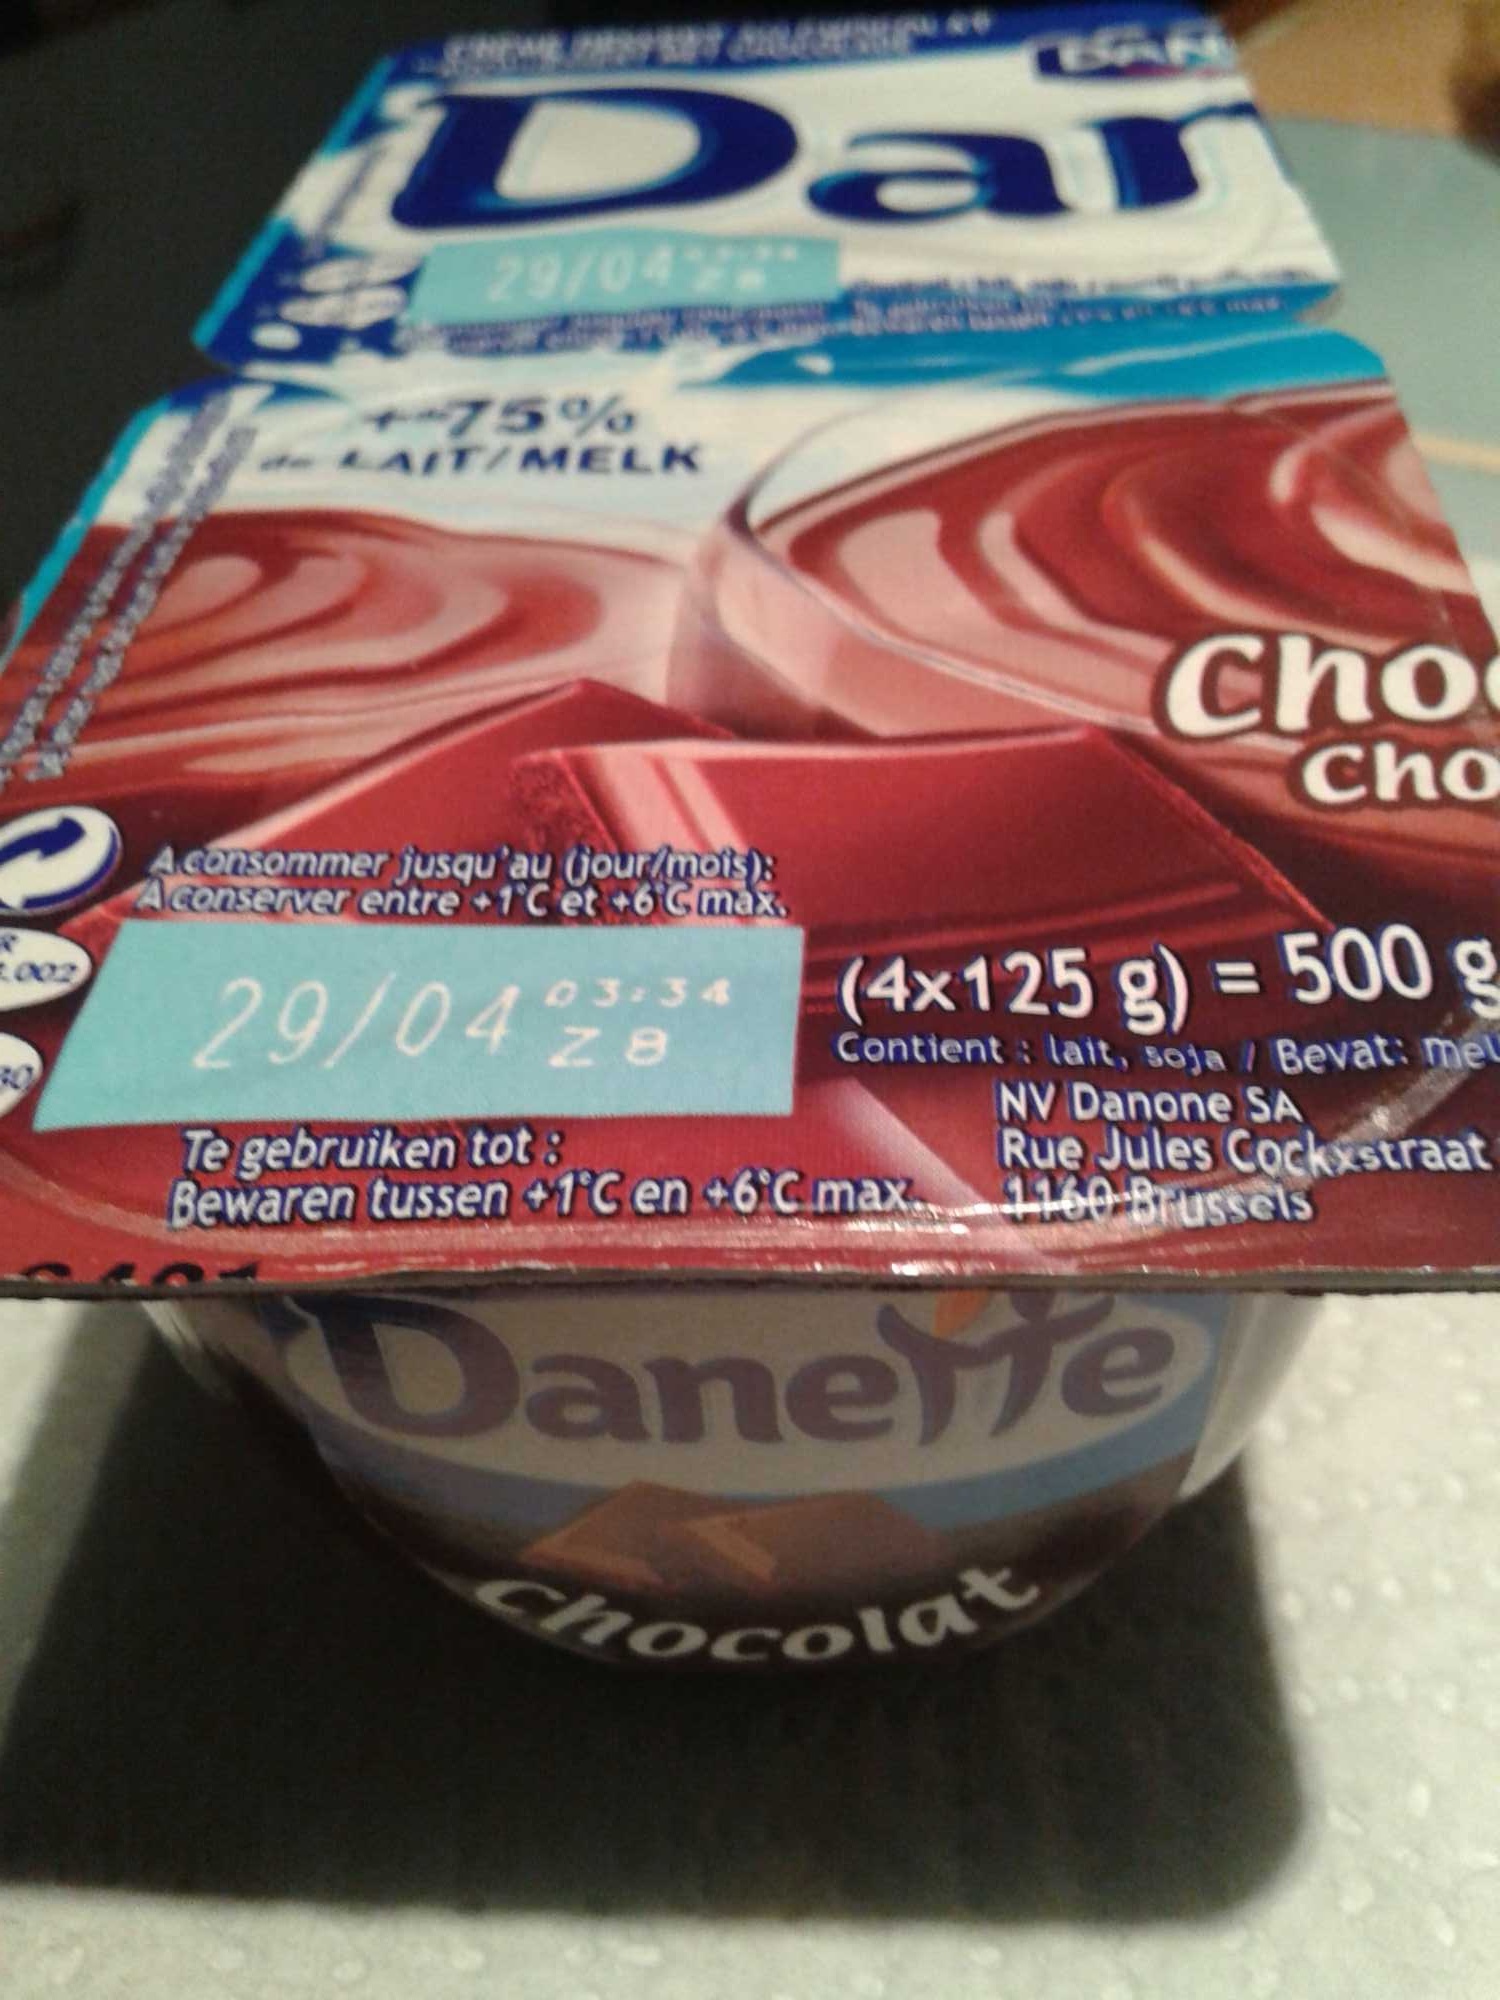 Danette Chocolate - Product